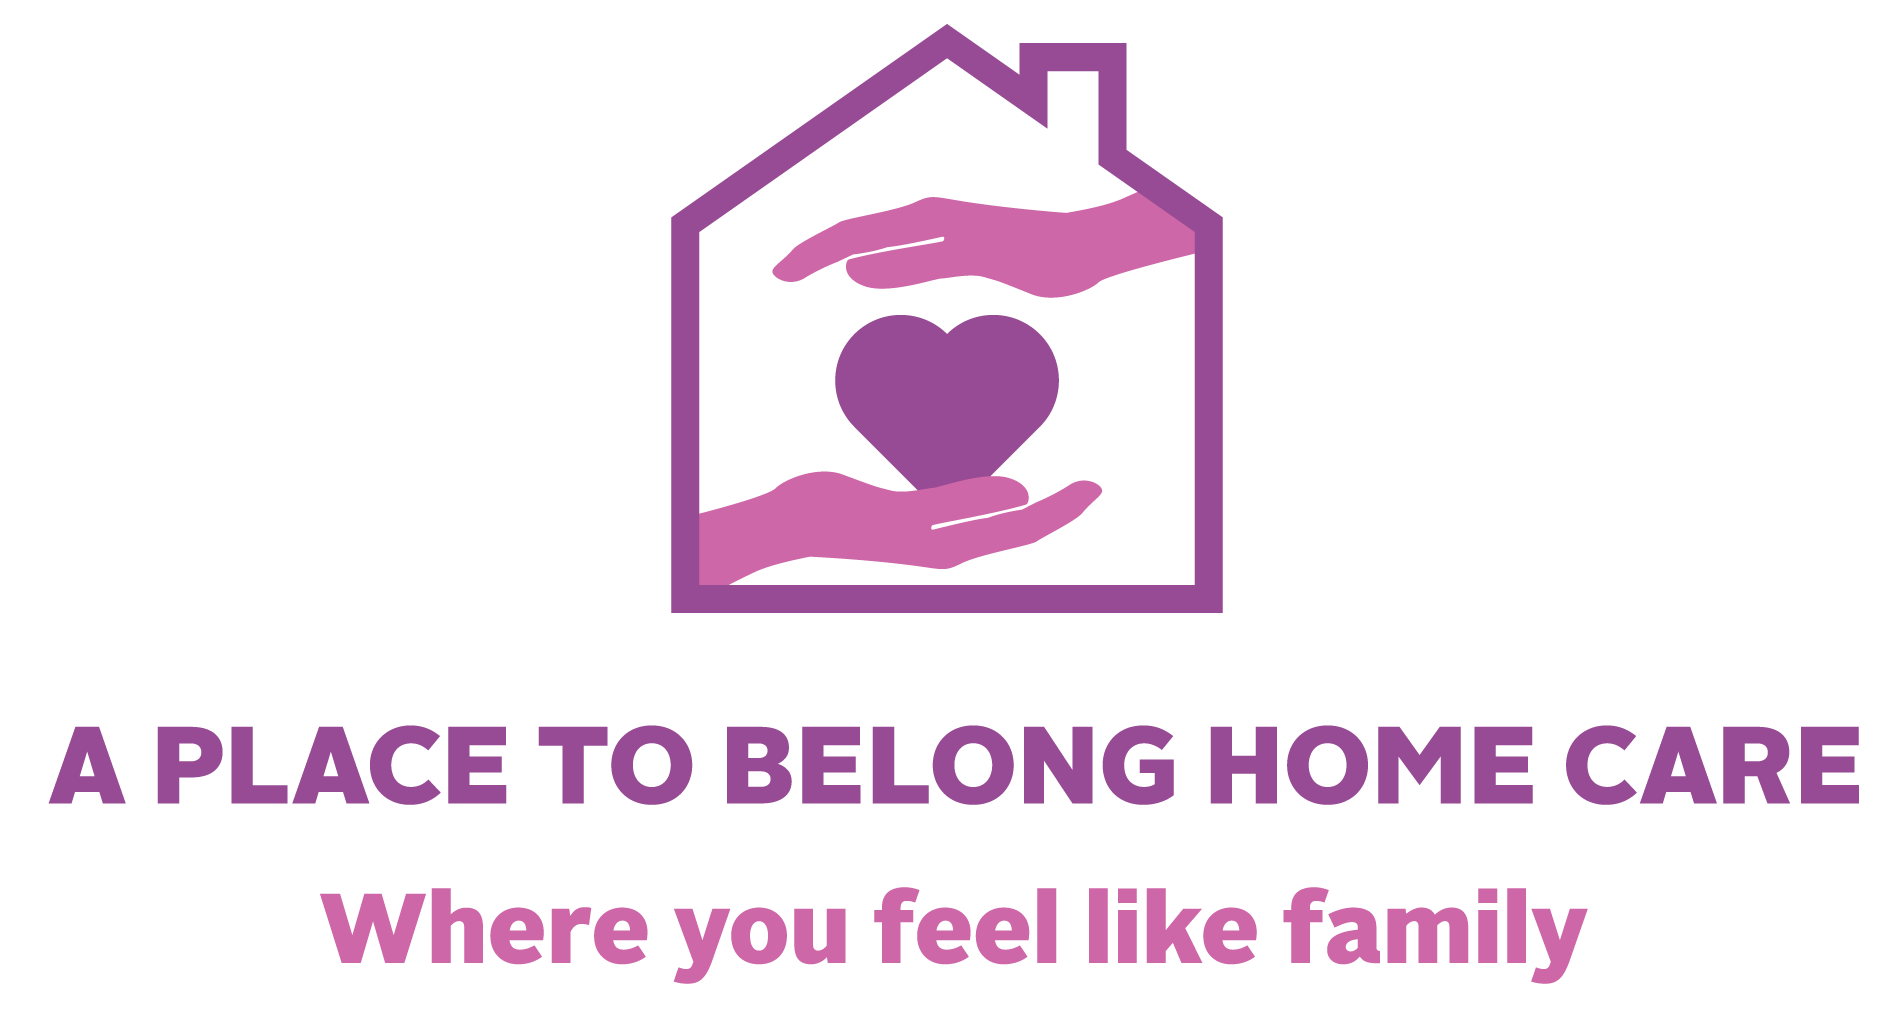 A Place To Belong Home Care